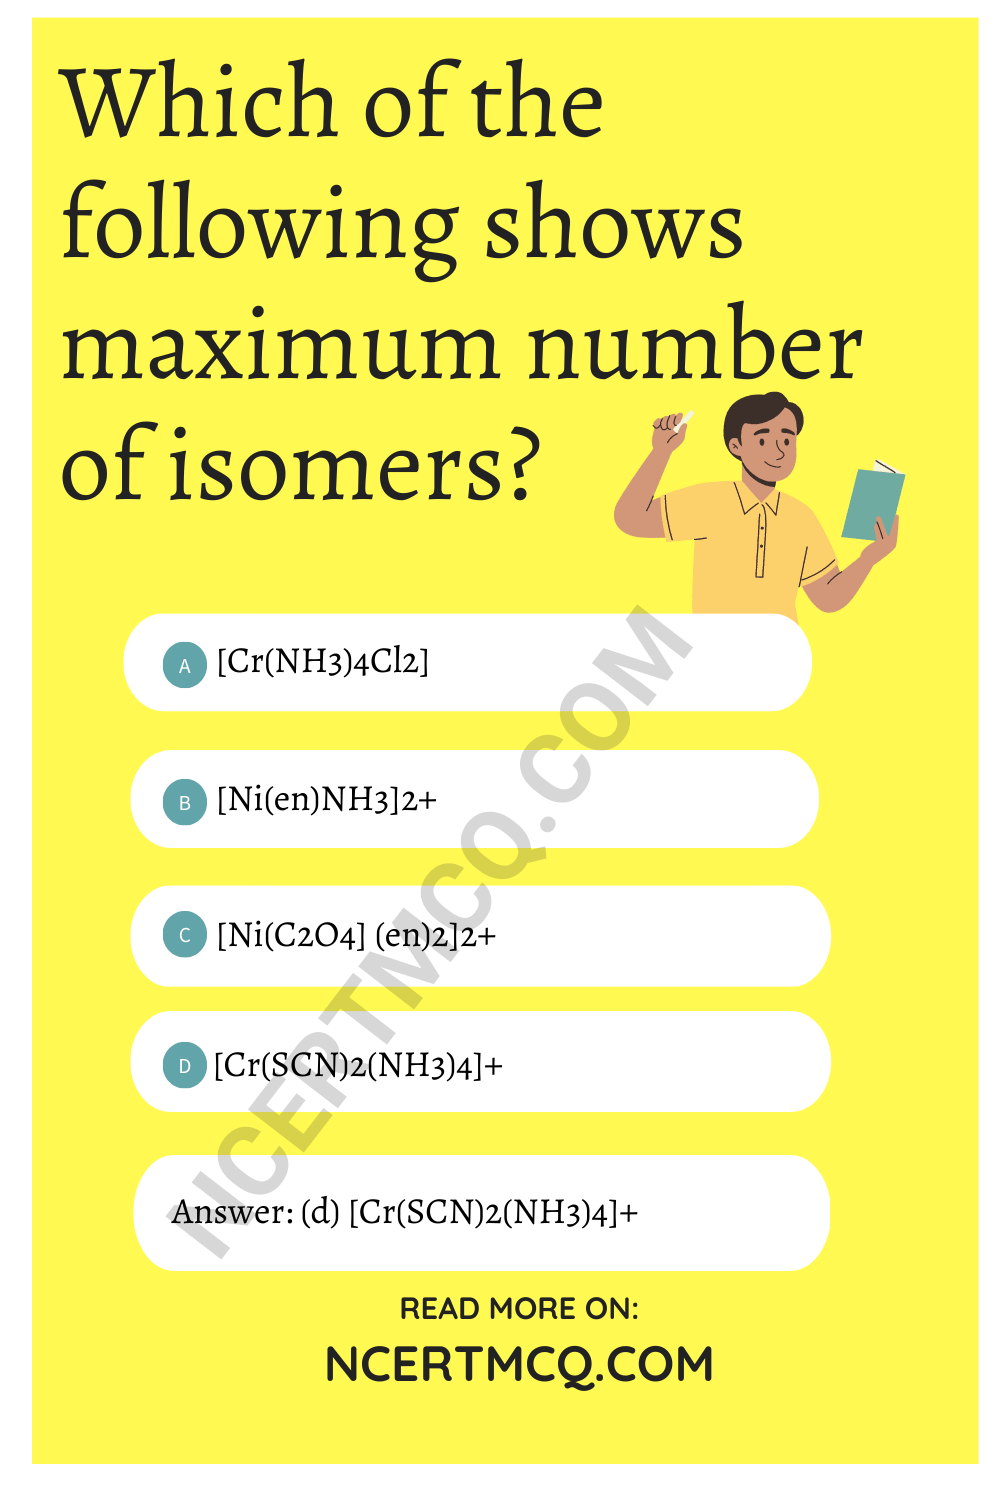 Which of the following shows maximum number of isomers?